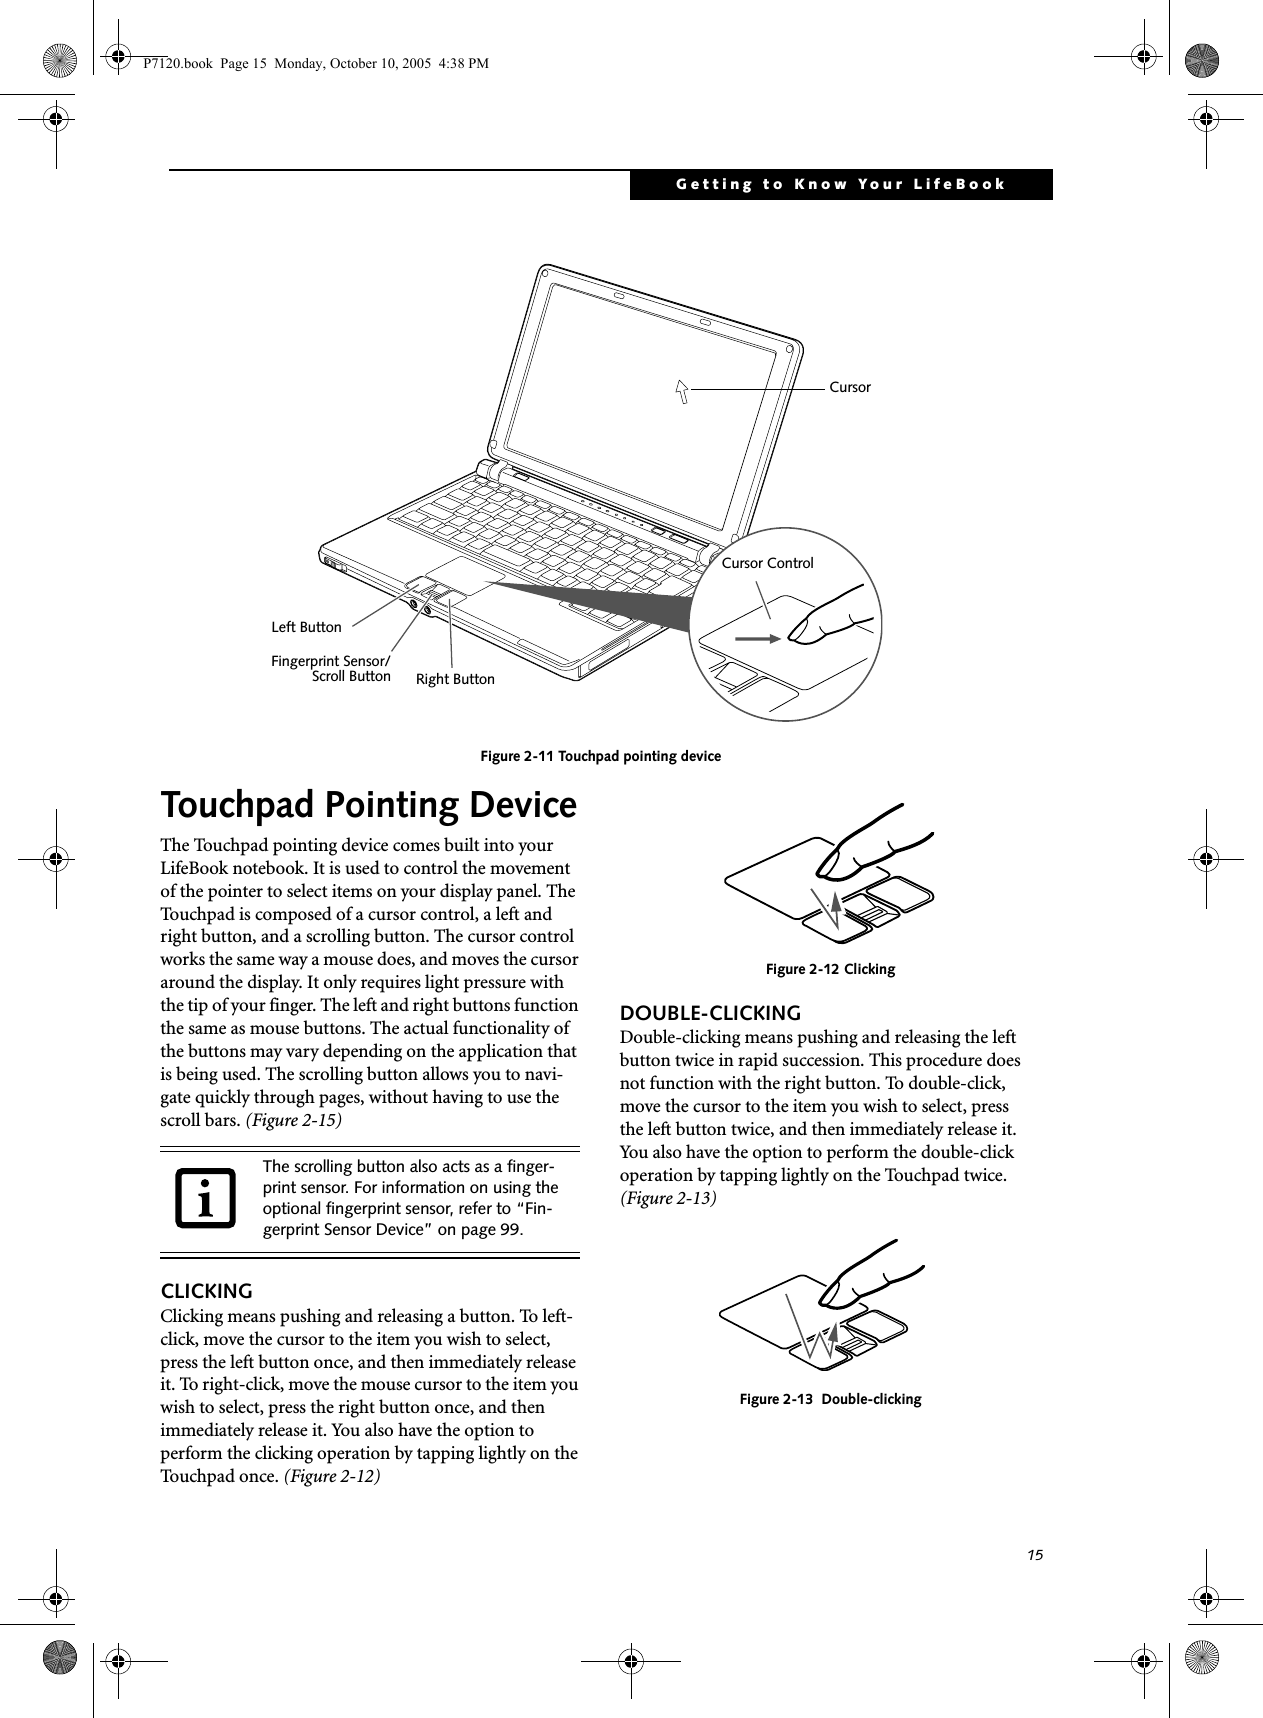 15Getting to Know Your LifeBookFigure 2-11 Touchpad pointing deviceTouchpad Pointing DeviceThe Touchpad pointing device comes built into your LifeBook notebook. It is used to control the movement of the pointer to select items on your display panel. The Touchpad is composed of a cursor control, a left and right button, and a scrolling button. The cursor control works the same way a mouse does, and moves the cursor around the display. It only requires light pressure with the tip of your finger. The left and right buttons function the same as mouse buttons. The actual functionality of the buttons may vary depending on the application that is being used. The scrolling button allows you to navi-gate quickly through pages, without having to use the scroll bars. (Figure 2-15)CLICKINGClicking means pushing and releasing a button. To left-click, move the cursor to the item you wish to select, press the left button once, and then immediately release it. To right-click, move the mouse cursor to the item you wish to select, press the right button once, and then immediately release it. You also have the option to perform the clicking operation by tapping lightly on the Touchpad once. (Figure 2-12)Figure 2-12 ClickingDOUBLE-CLICKINGDouble-clicking means pushing and releasing the left button twice in rapid succession. This procedure does not function with the right button. To double-click, move the cursor to the item you wish to select, press the left button twice, and then immediately release it. You also have the option to perform the double-click operation by tapping lightly on the Touchpad twice. (Figure 2-13)Figure 2-13  Double-clickingCursor ControlLeft ButtonRight ButtonFingerprint Sensor/CursorScroll ButtonThe scrolling button also acts as a finger-print sensor. For information on using the optional fingerprint sensor, refer to “Fin-gerprint Sensor Device” on page 99.P7120.book  Page 15  Monday, October 10, 2005  4:38 PM